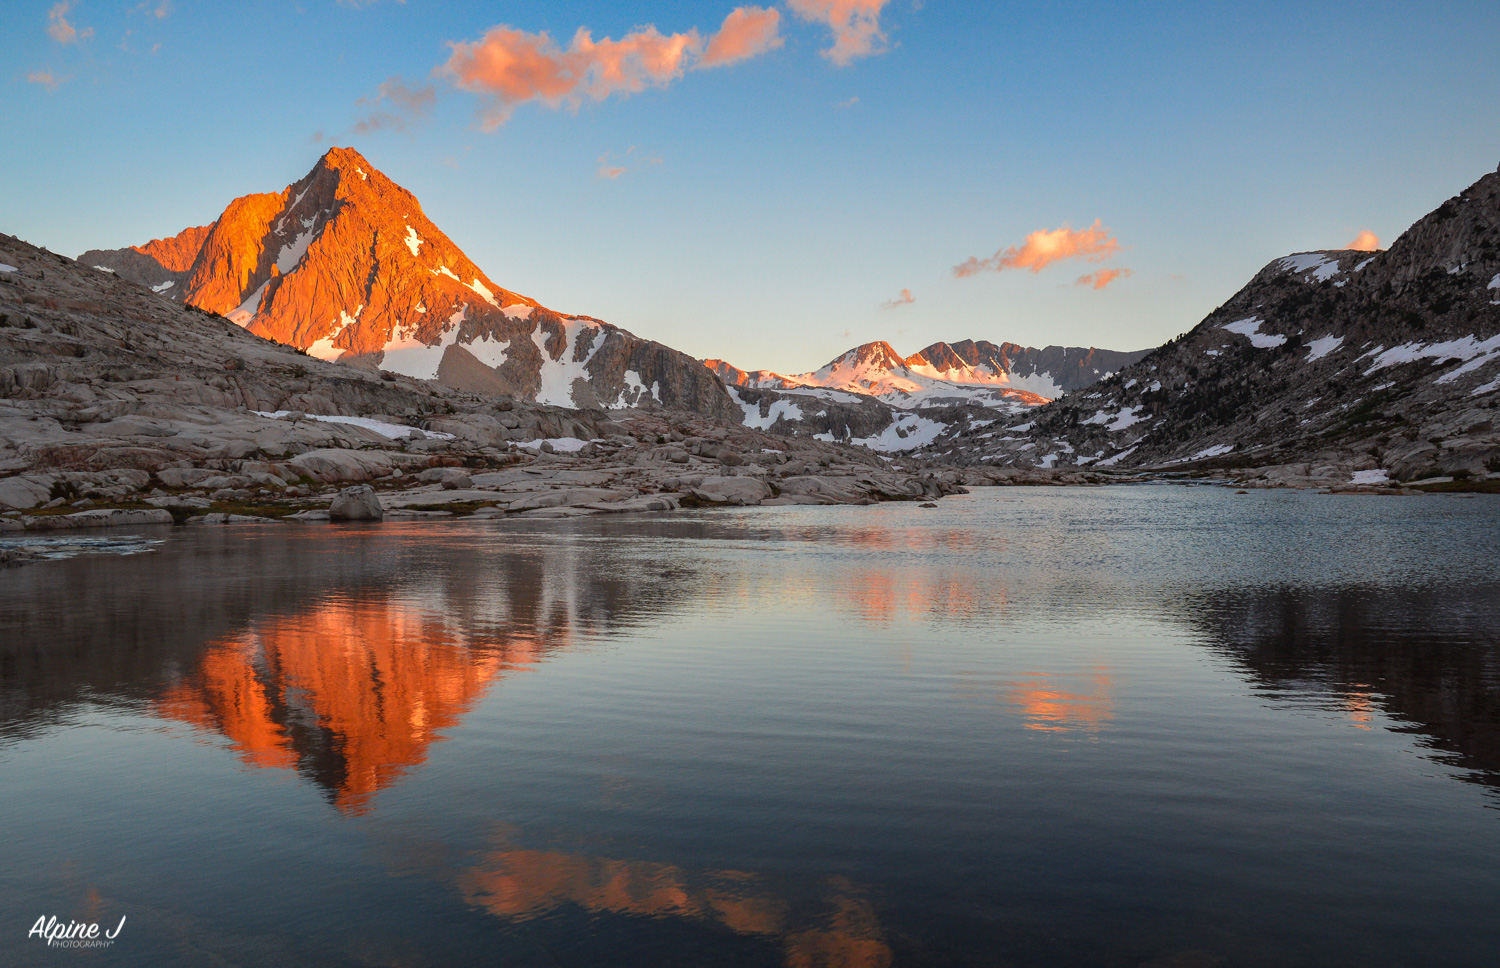 A reflection of an alpine lake in the Sierra Nevada Mountains in California.